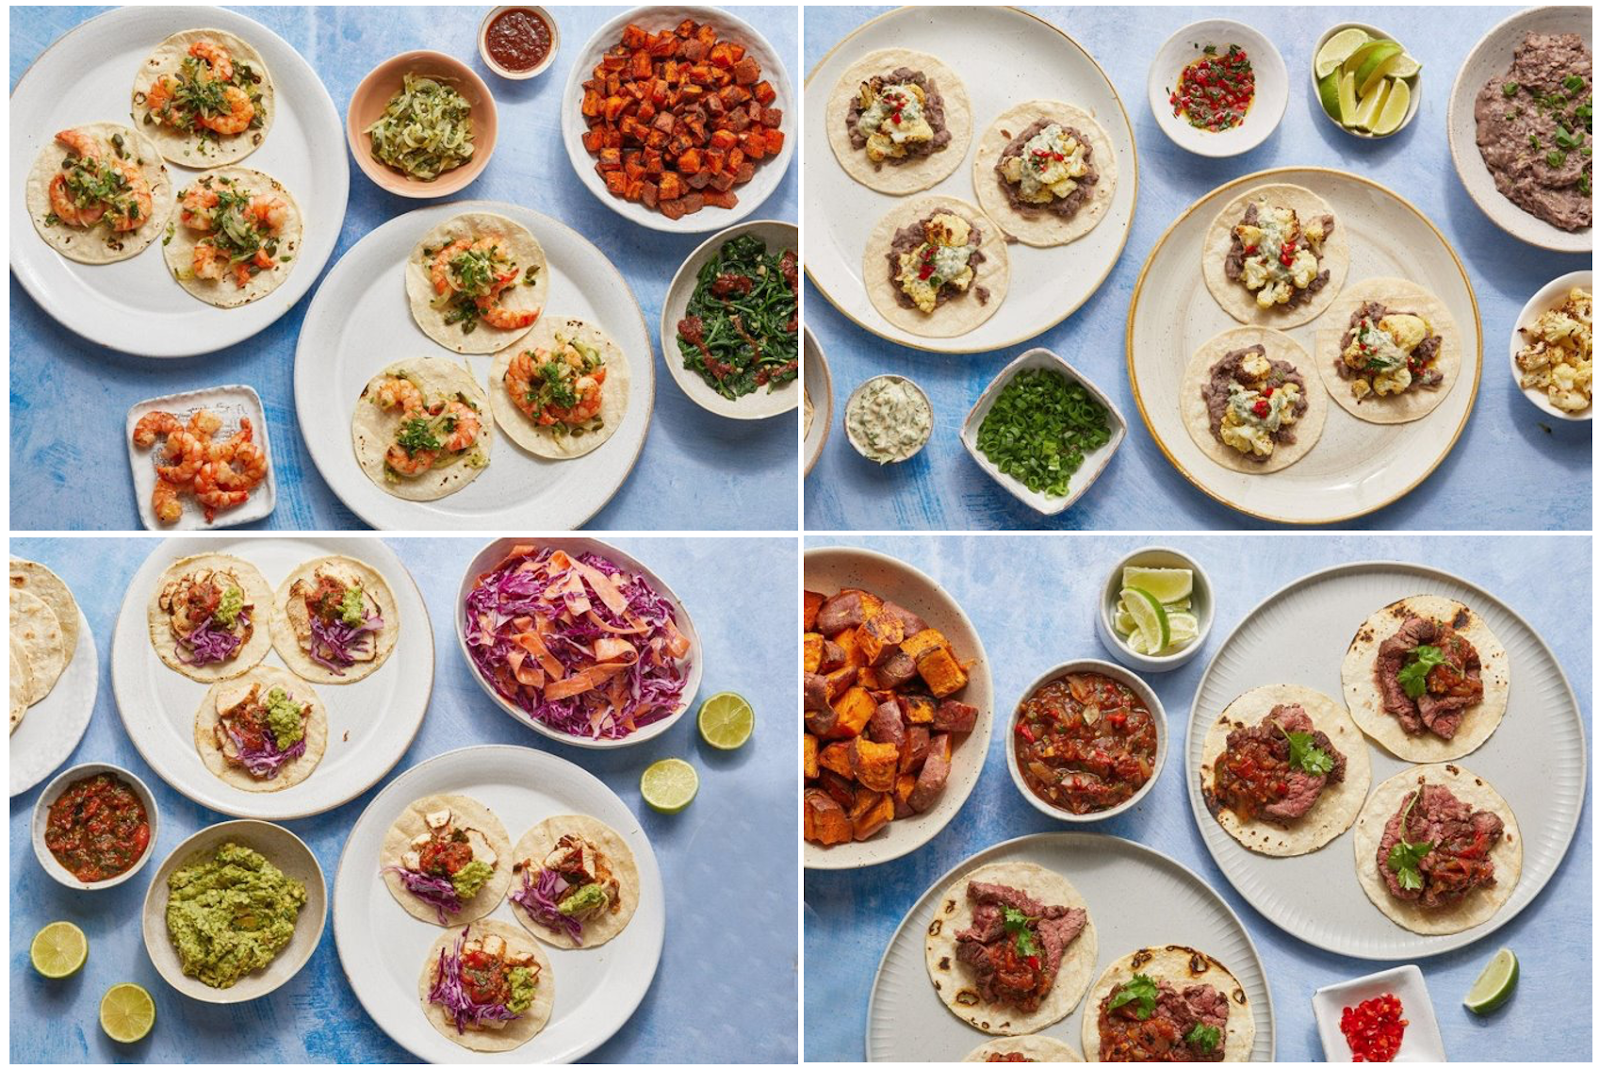 MINDFUL CHEF PARTNERS WITH WAHACA, INTRODUCING TACOS TO ITS MENU FOR THE FIRST TIME EVER